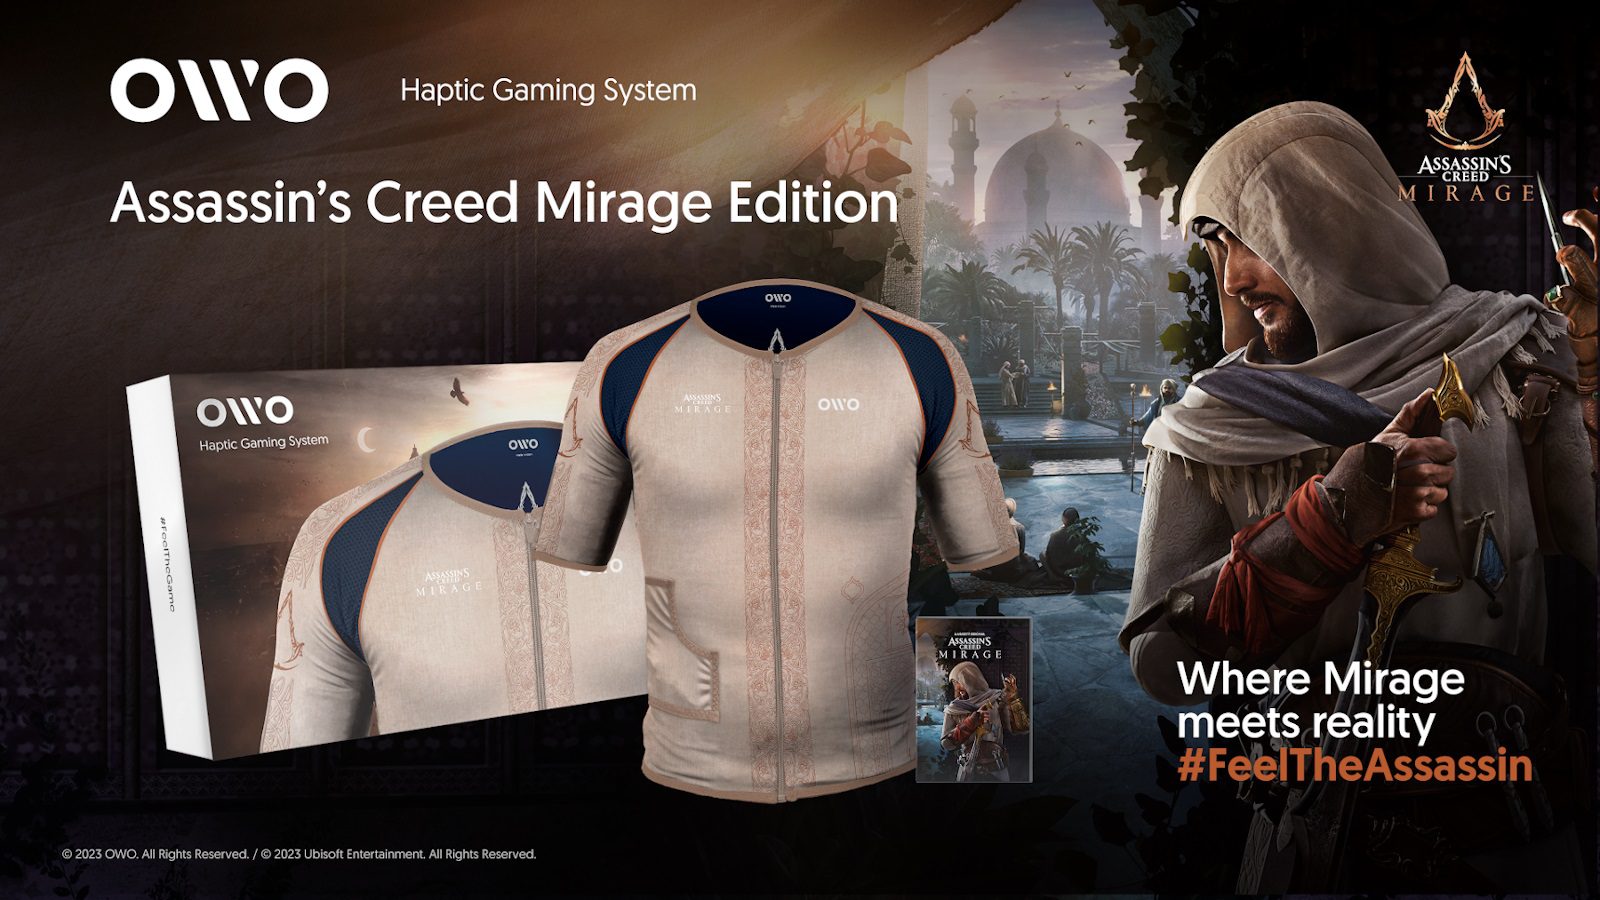 Assassin's Creed, Mirage, OWO, gaming